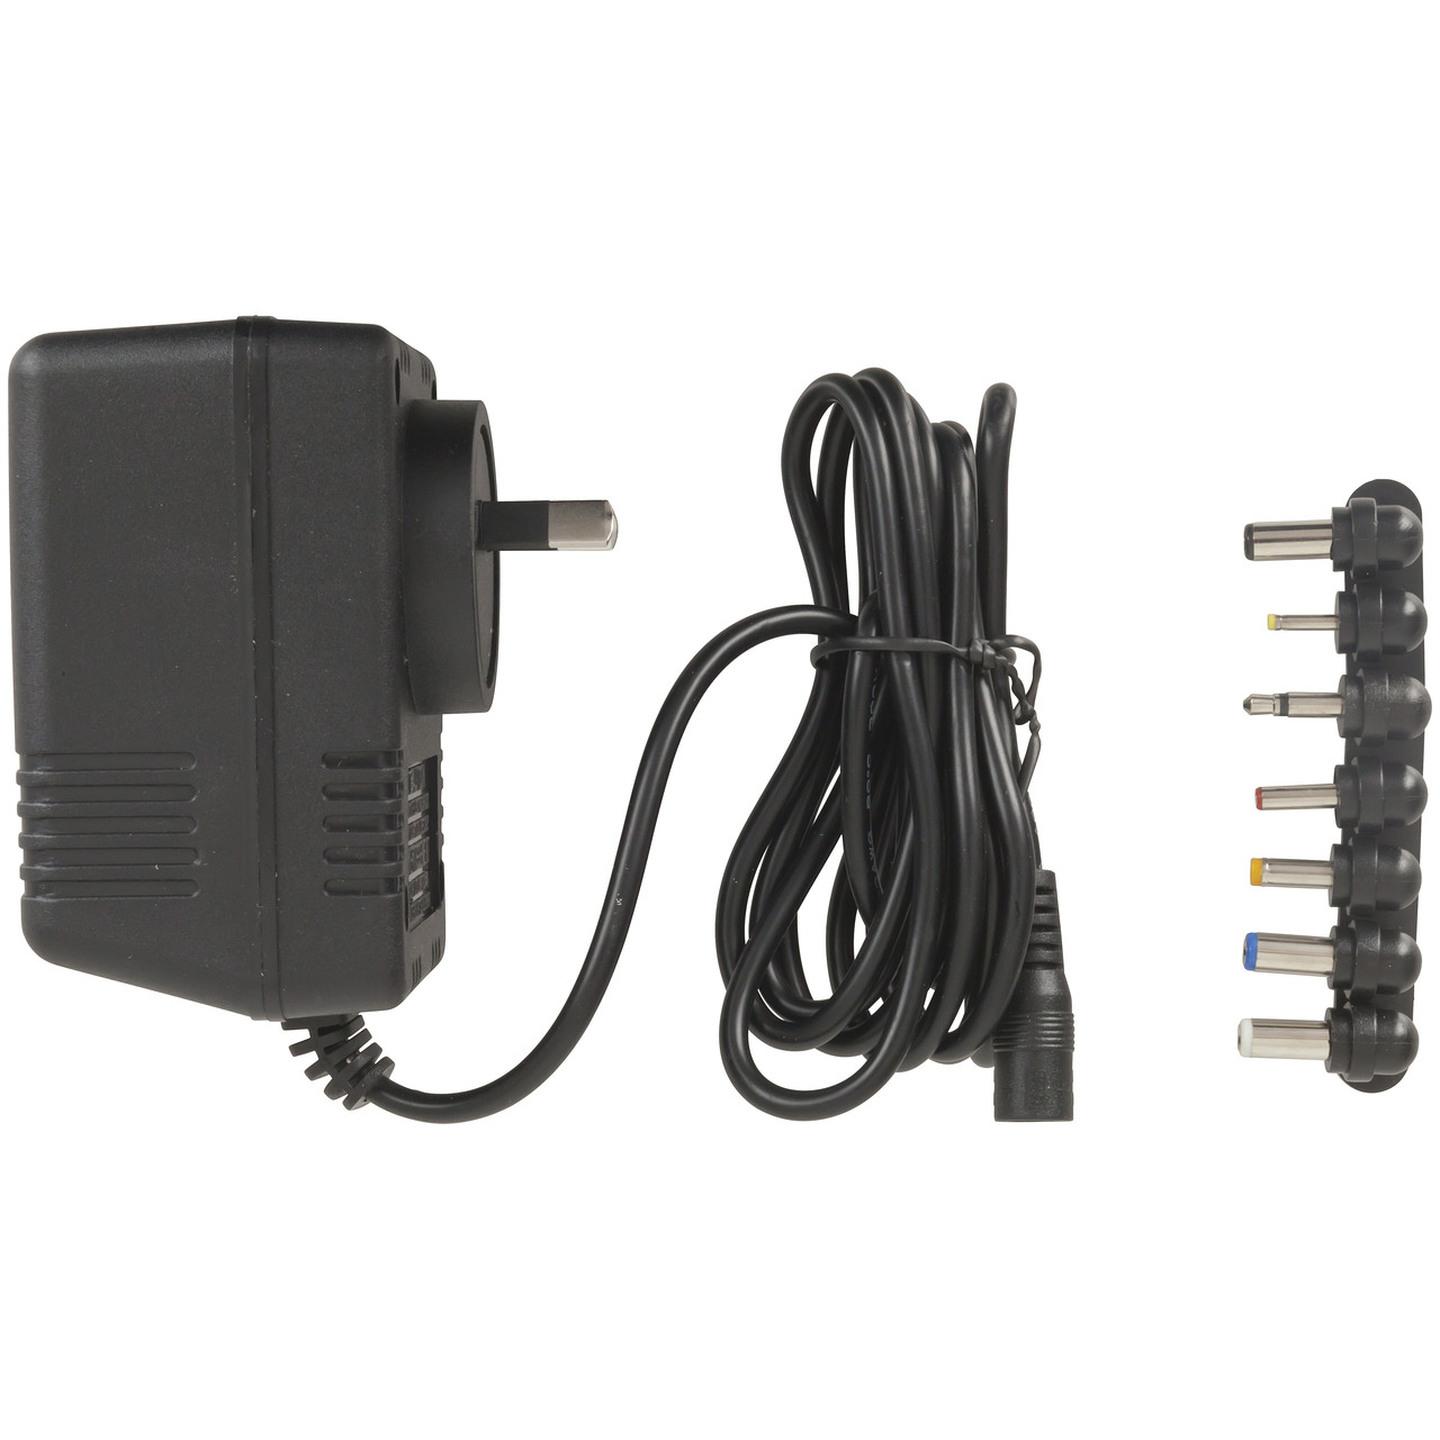 15VAC 1.5A Unregulated Power Supply 7DC Plugs